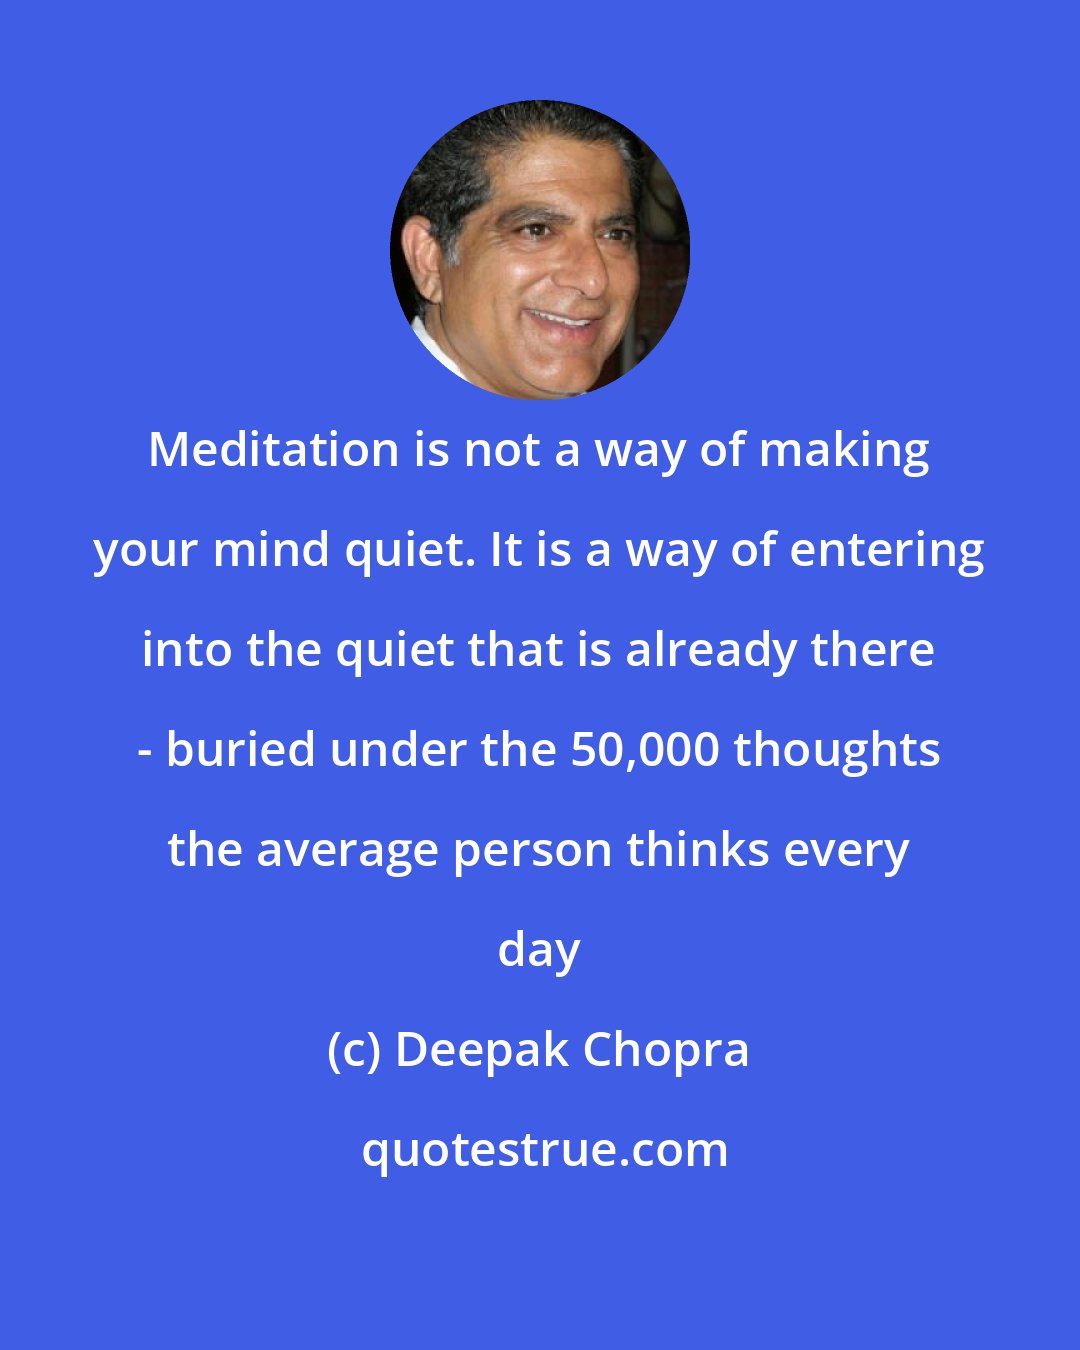 Deepak Chopra: Meditation is not a way of making your mind quiet. It is a way of entering into the quiet that is already there - buried under the 50,000 thoughts the average person thinks every day